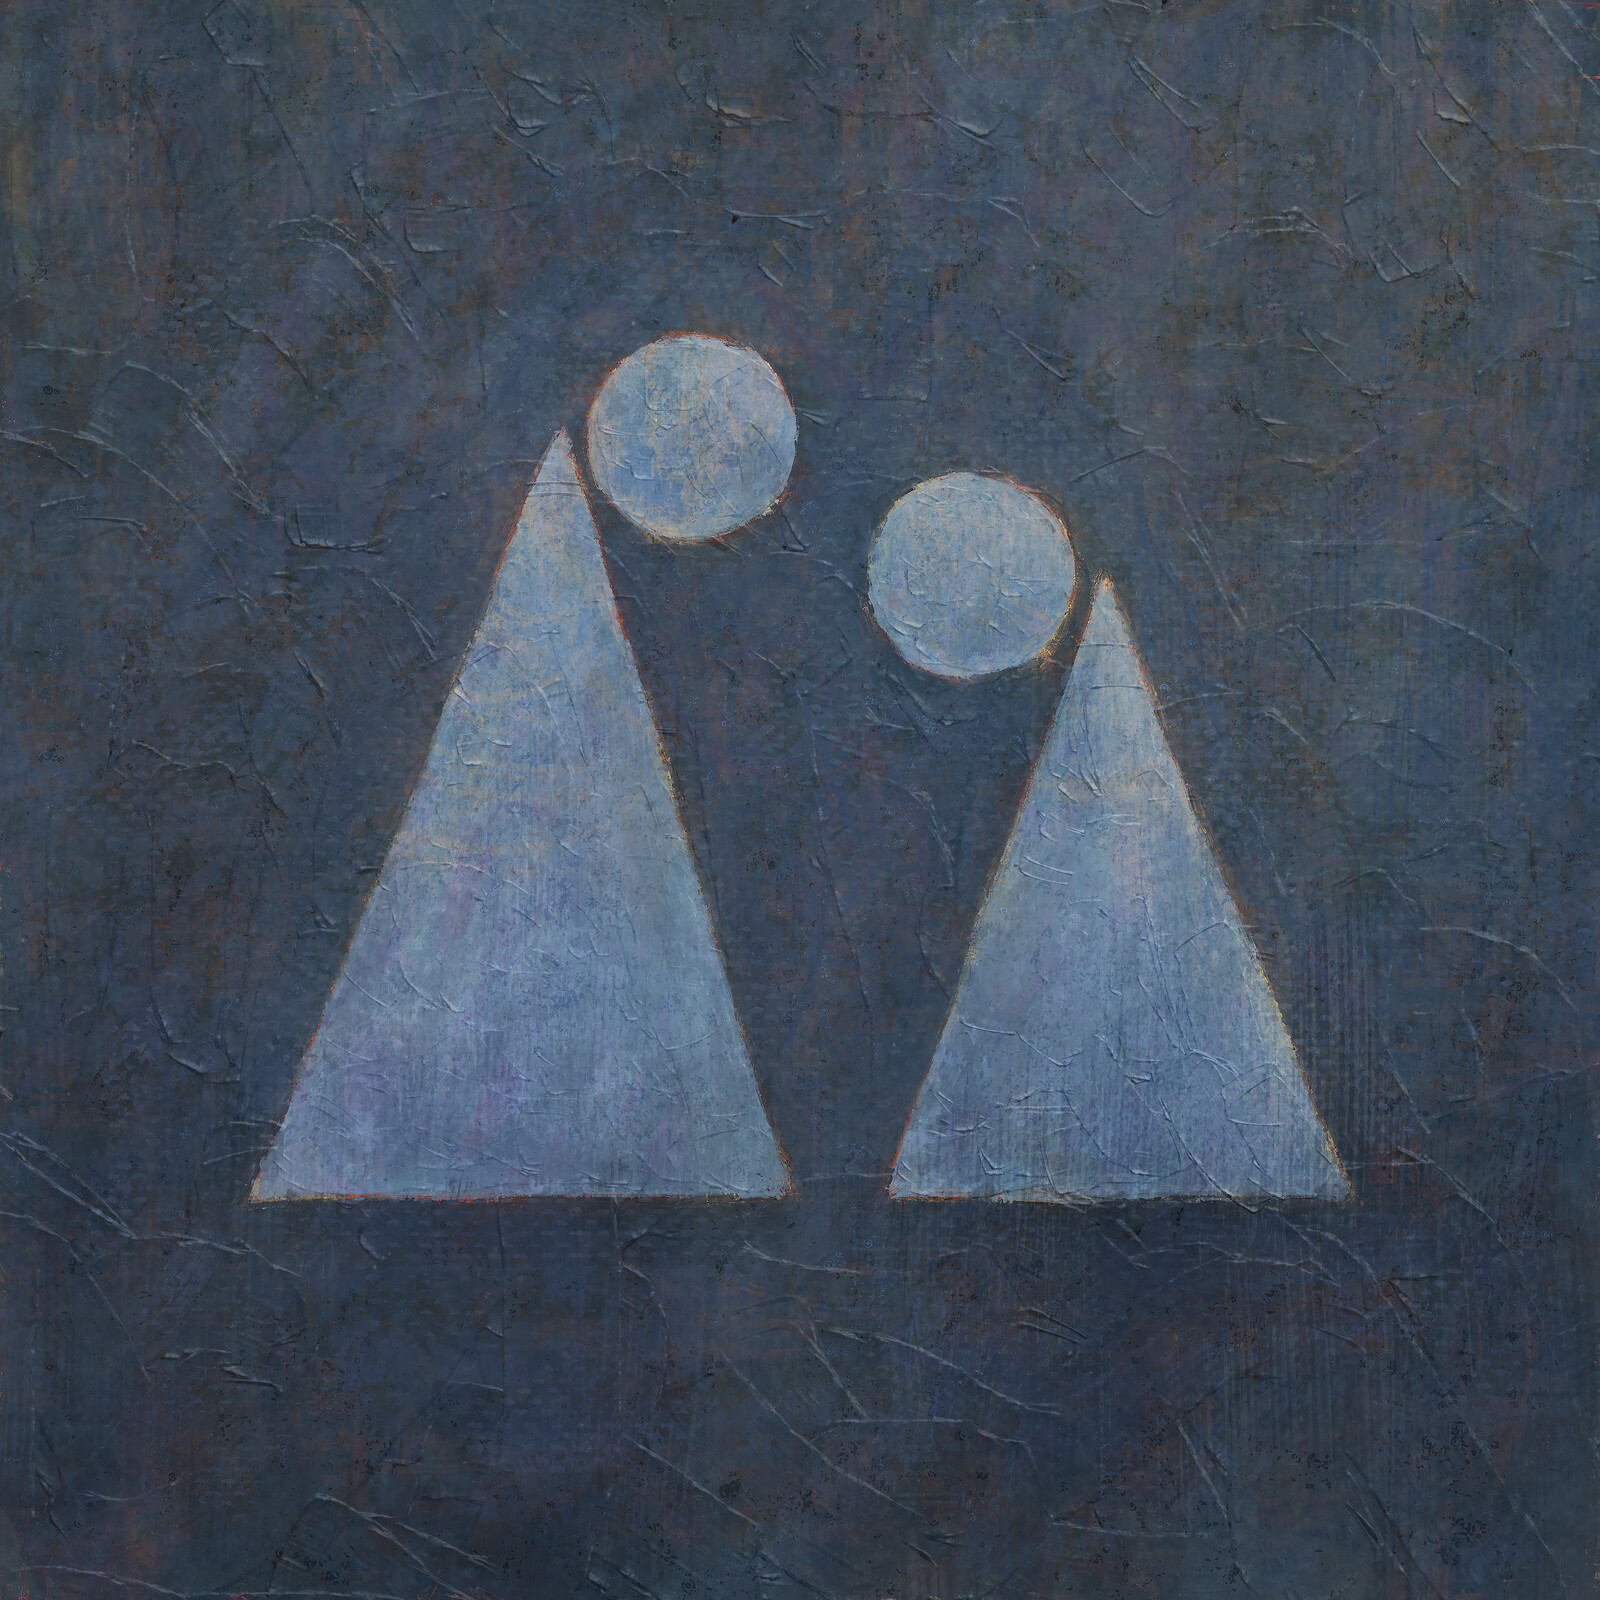 Two blue circle-and-triangle figures.